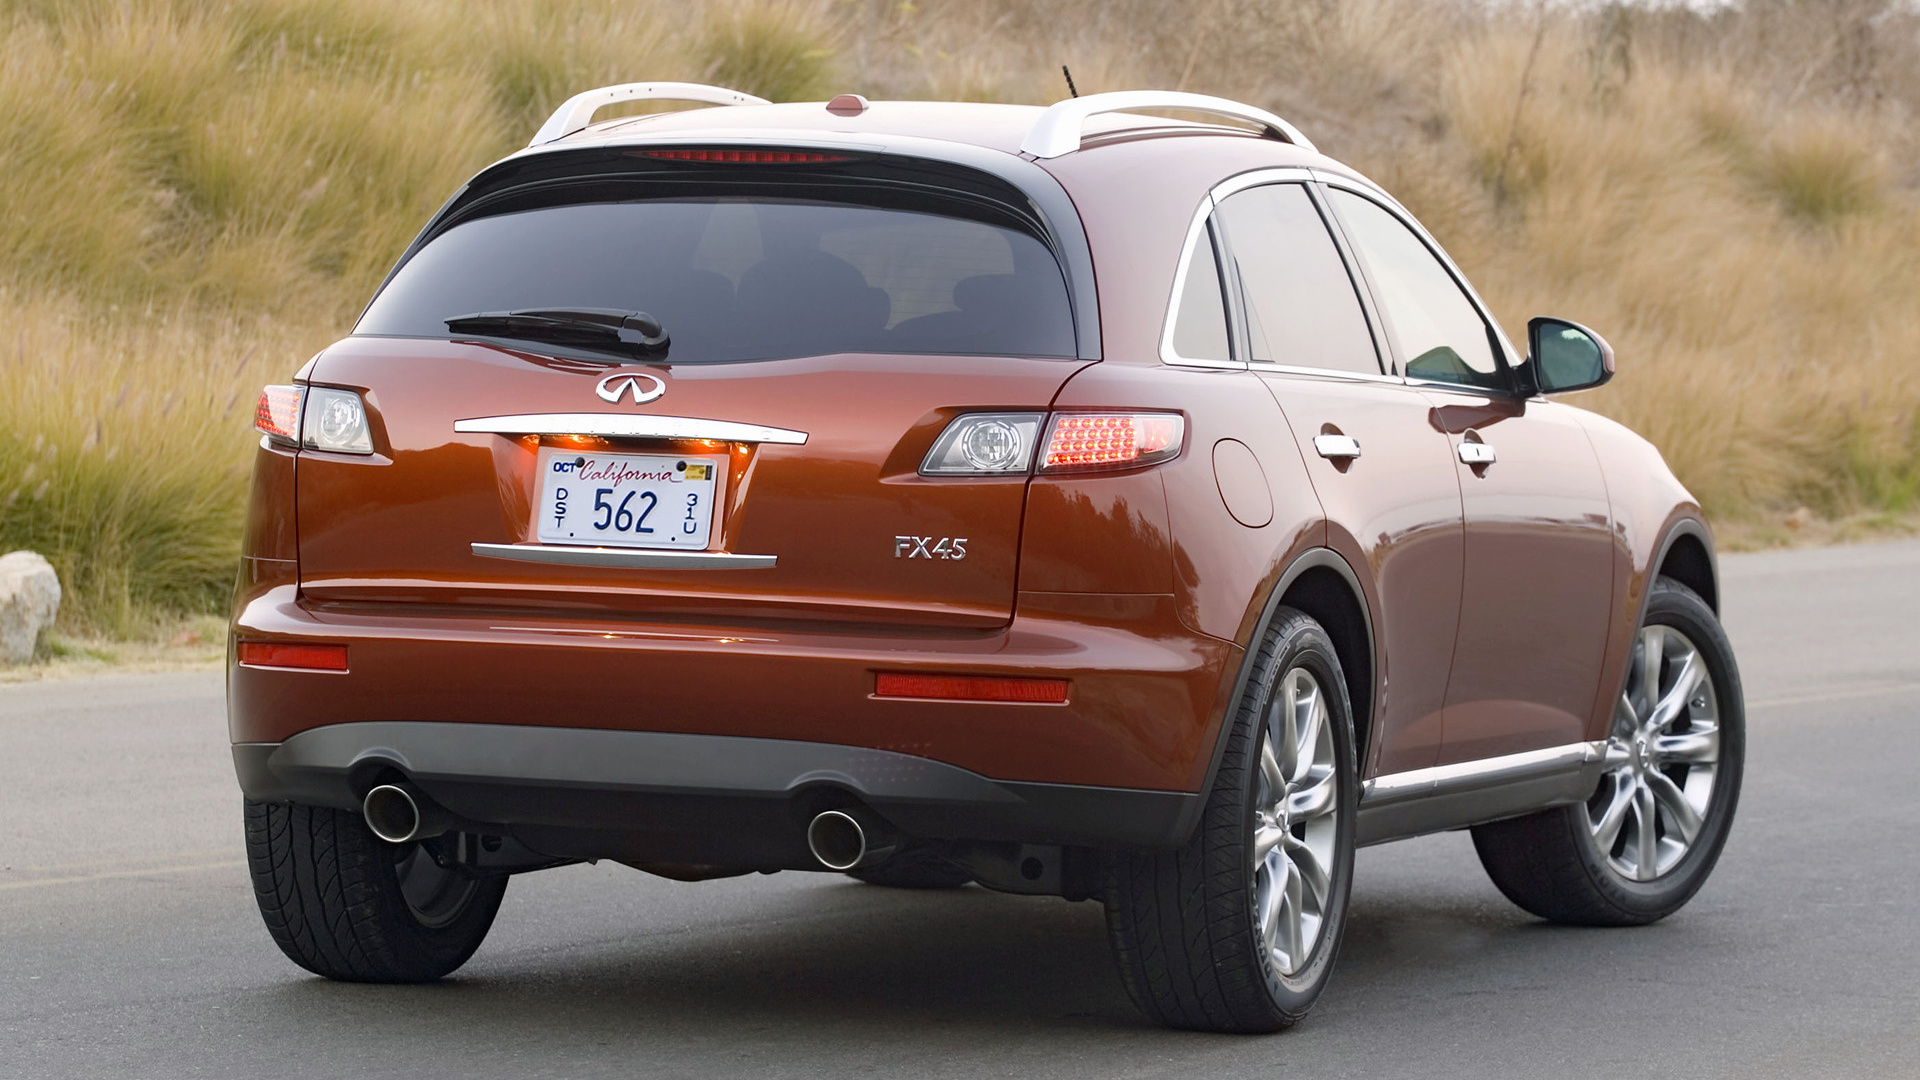 2006 Infiniti FX45 - Wallpapers and HD Images | Car Pixel